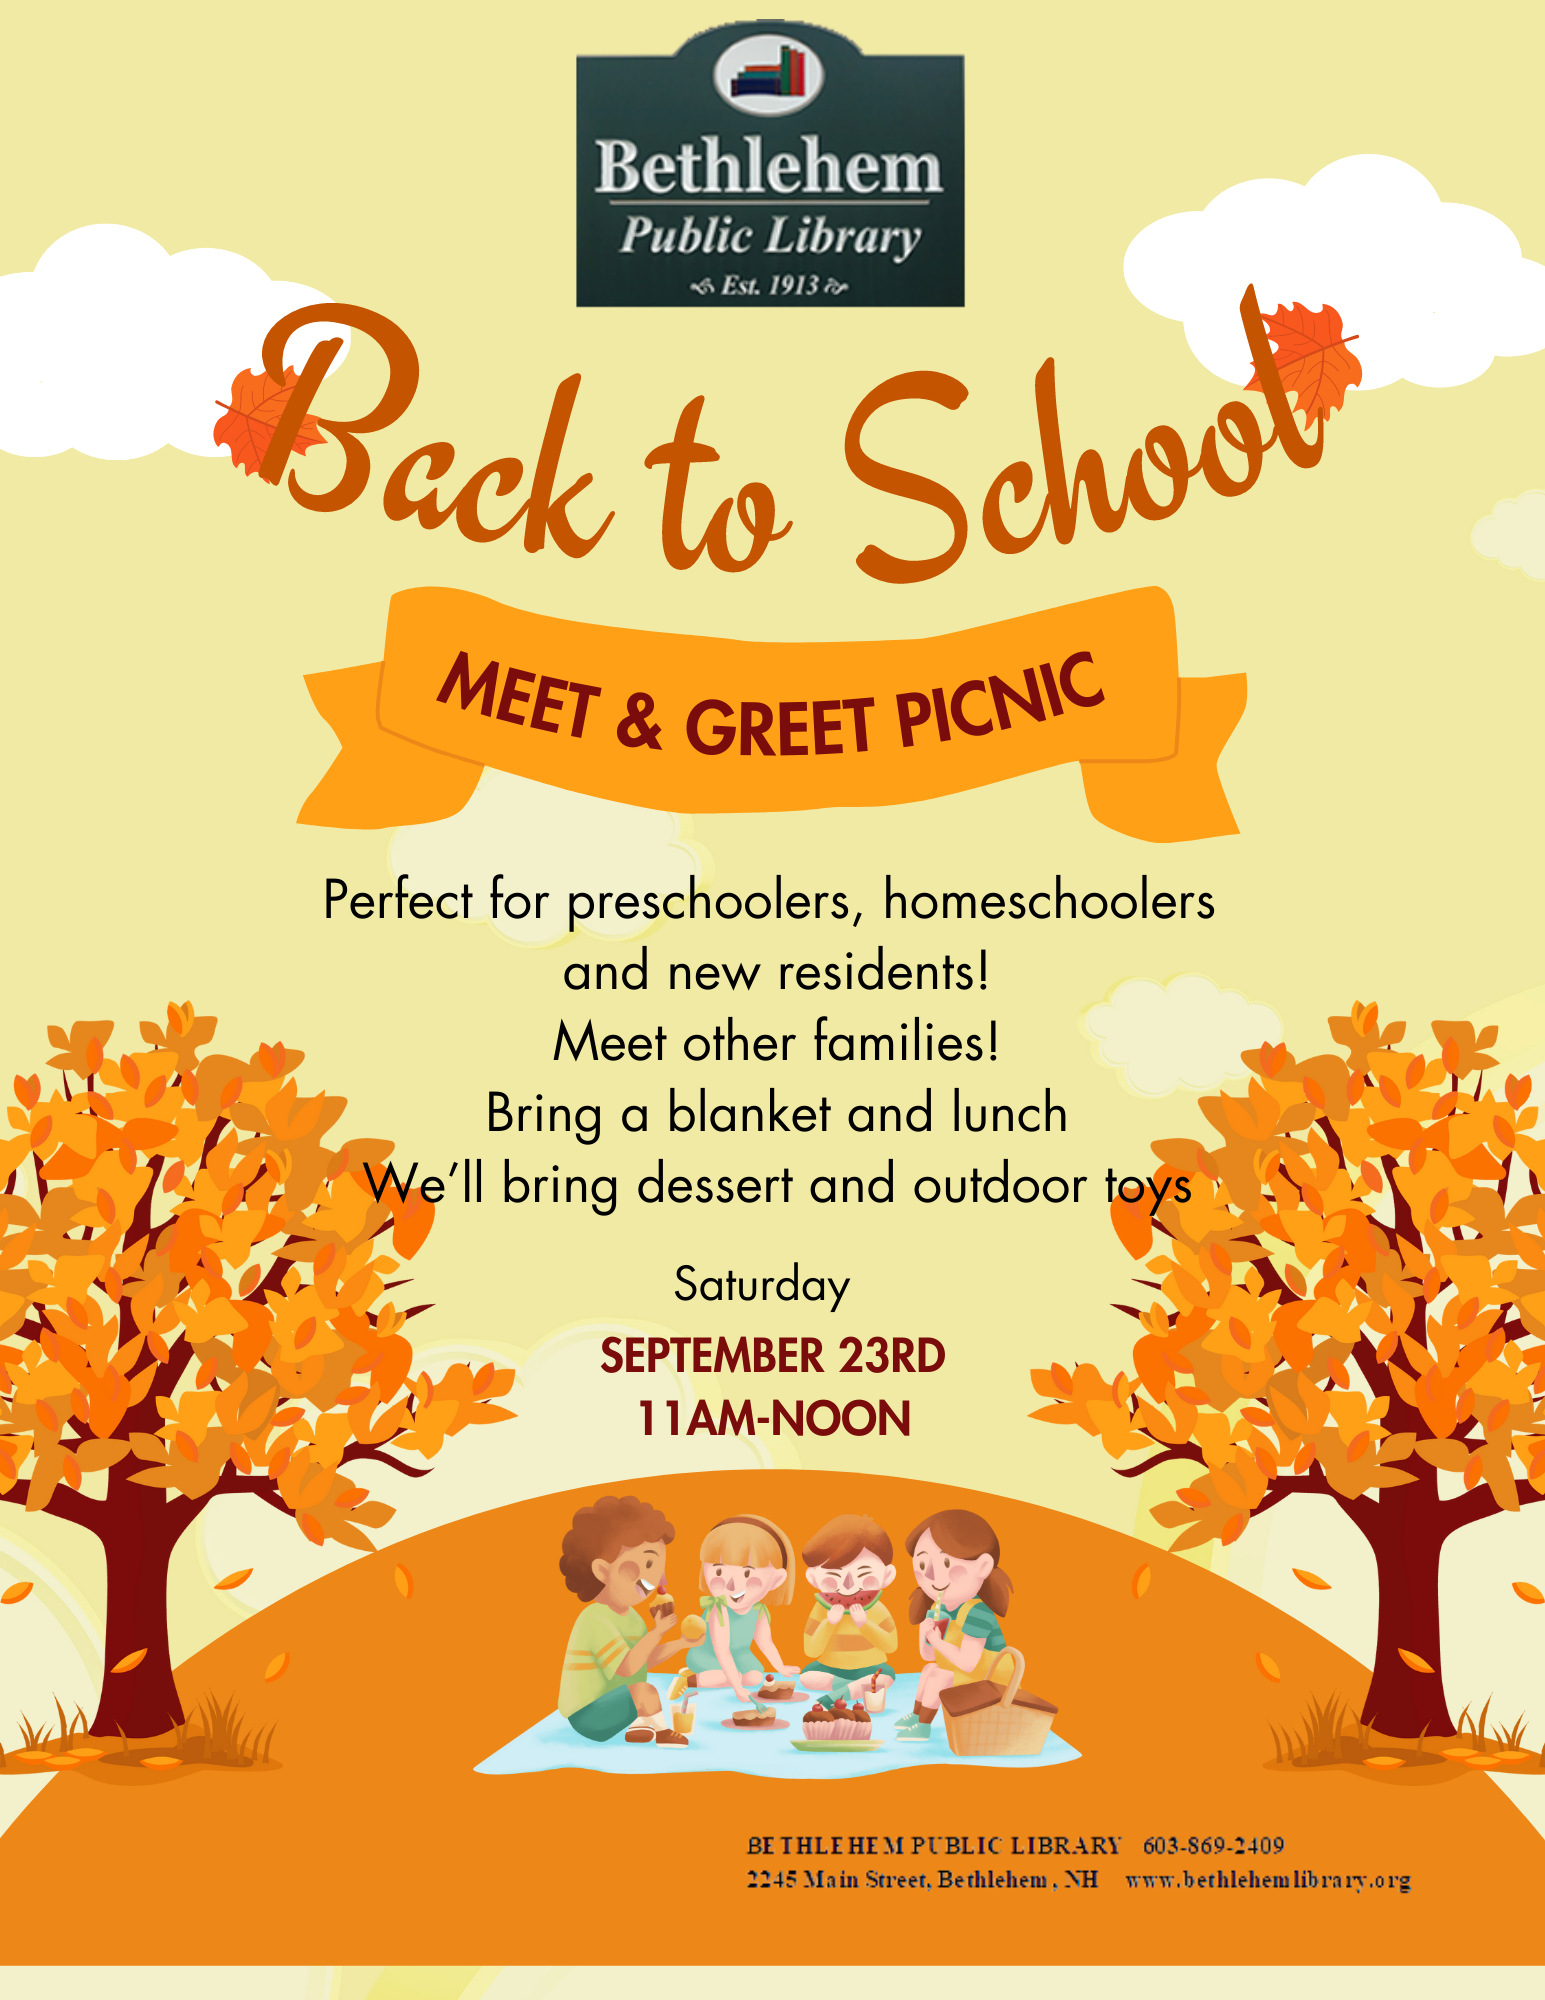 BAck to School Meet & Greet Picnic.  Perfect for preschoolers, homeschoolers  and new residents! Meet other families! Bring a blanket and lunch We’ll bring dessert and outdoor toys.  Saturday September 23rd 11am-Noon.